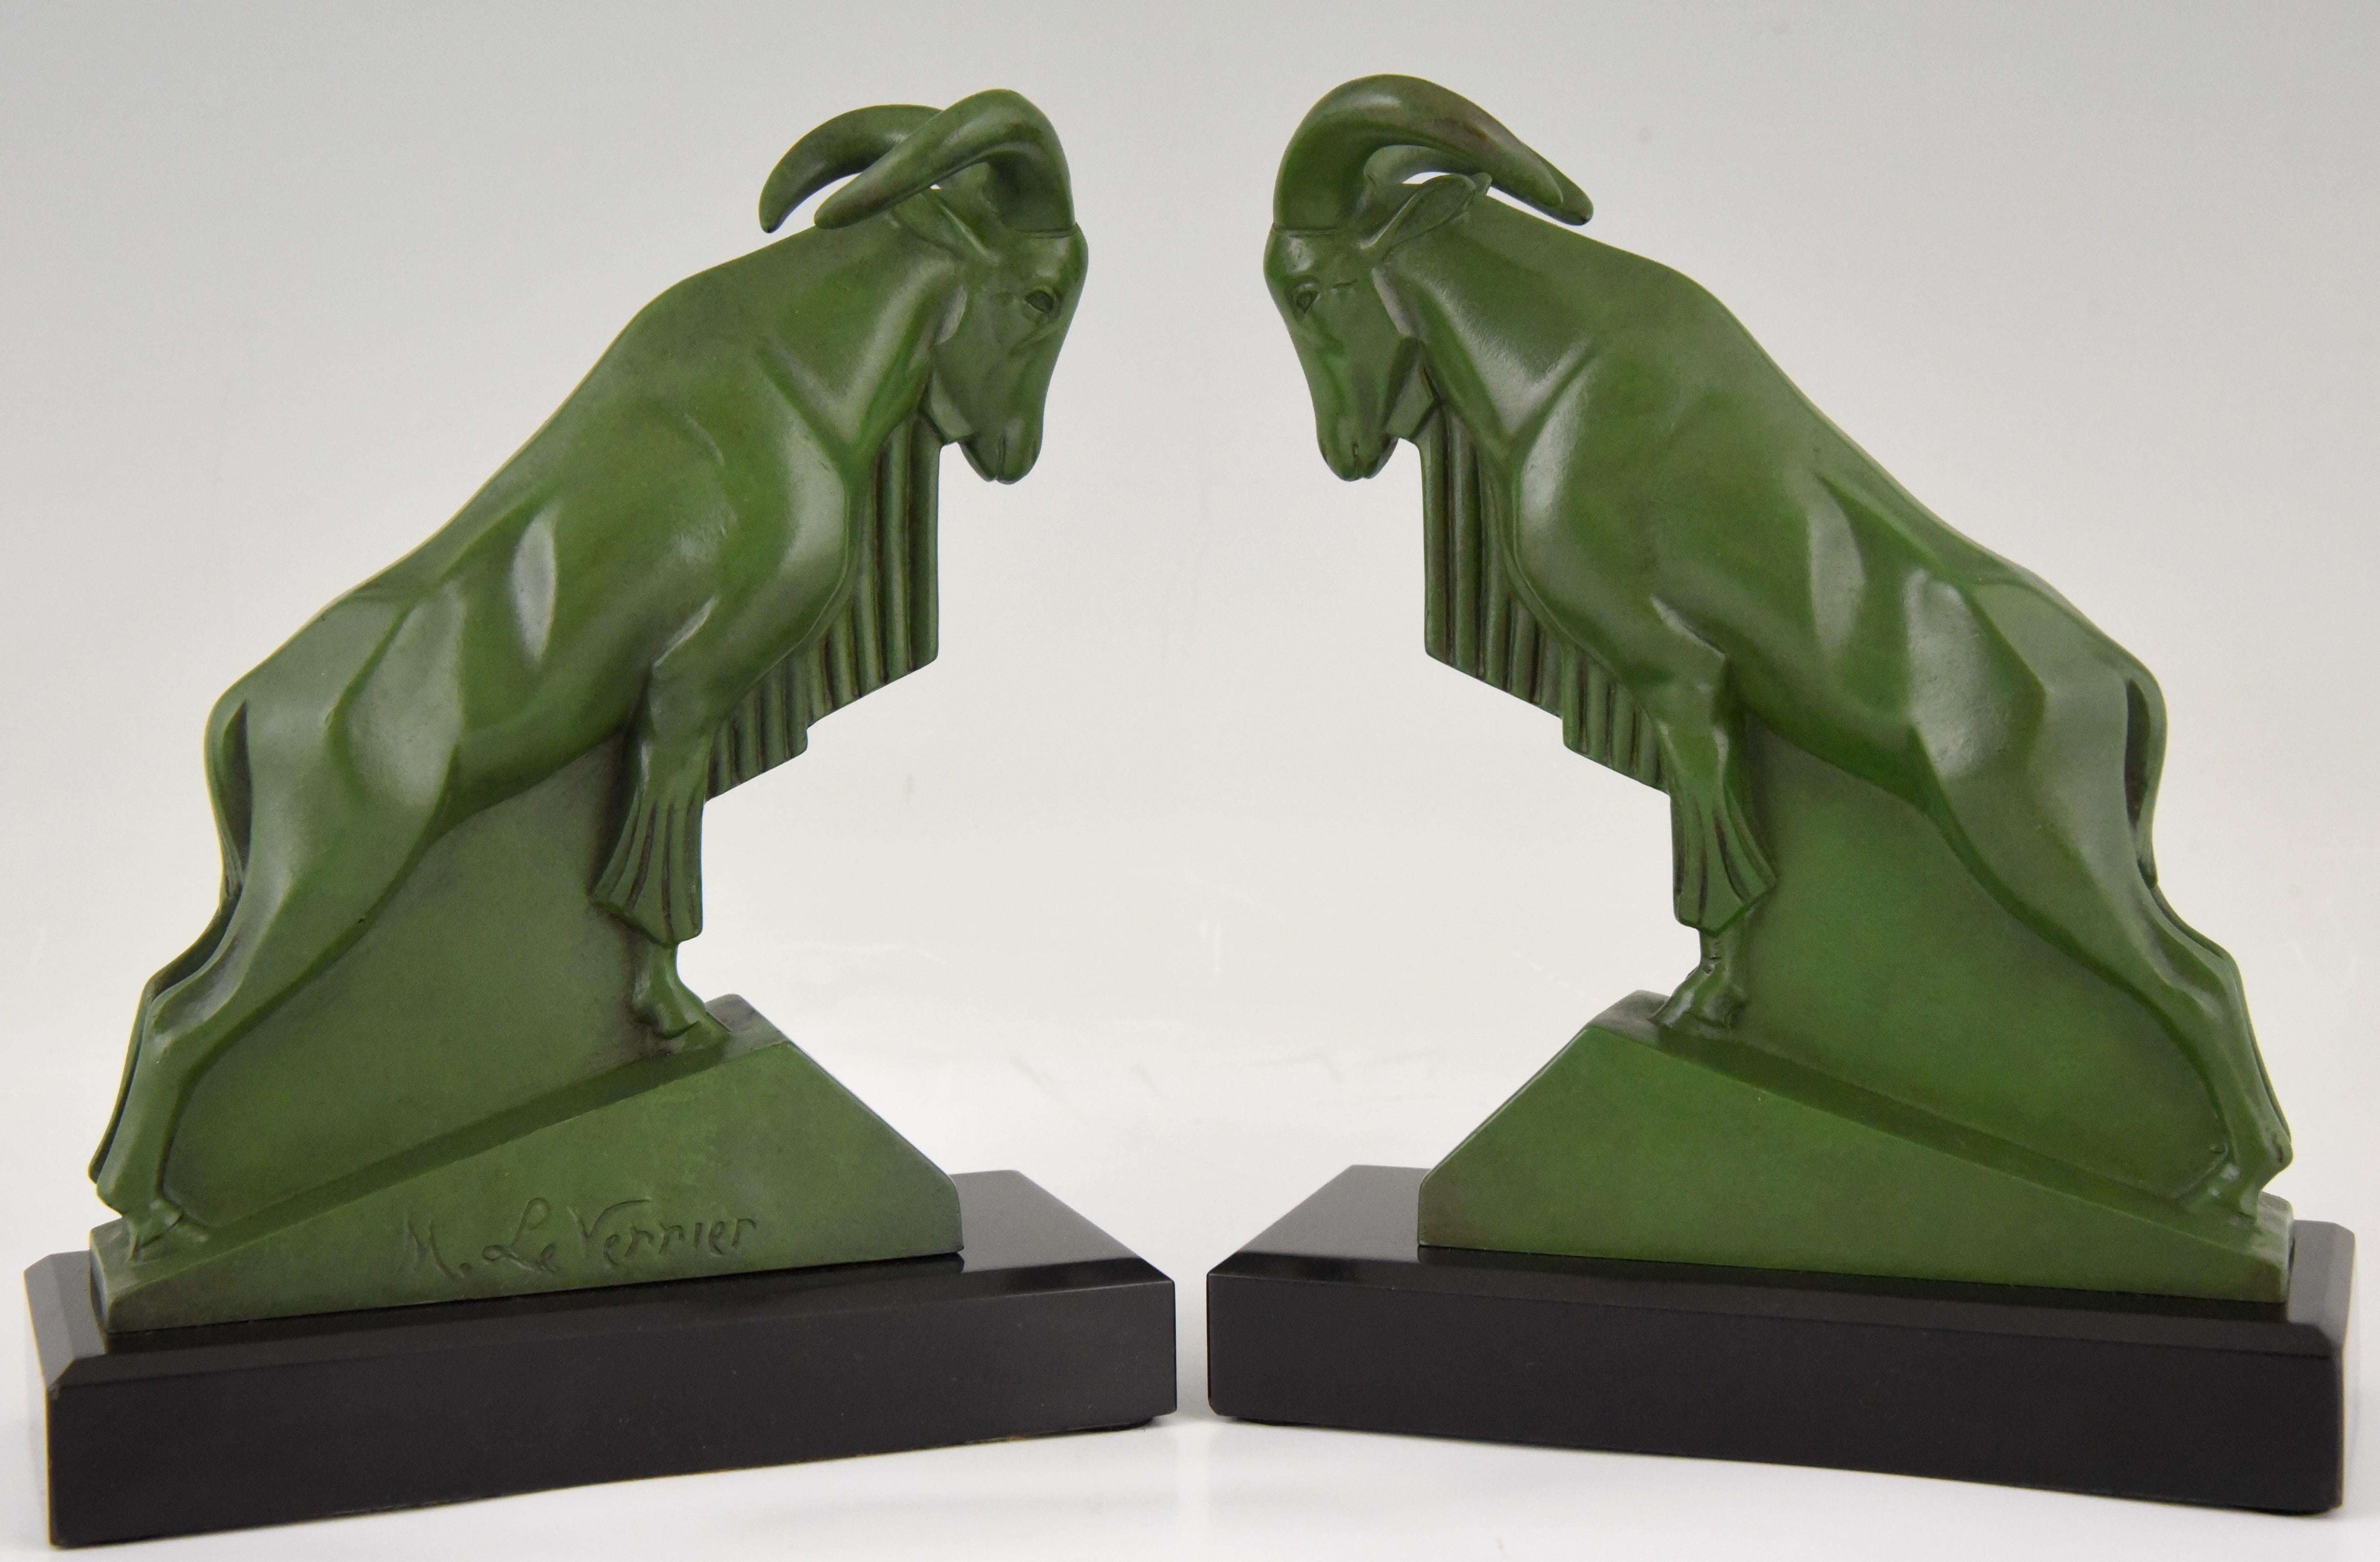 Stylish Art Deco Ibex or Ram bookends, signed by the well know sculptor Max Le Verrier with lovely green patina. The bookends are mounted on Belgian Black marble base. France 1930.
Literature:
“Art Deco sculpture” by Victor Arwas, Academy. ?